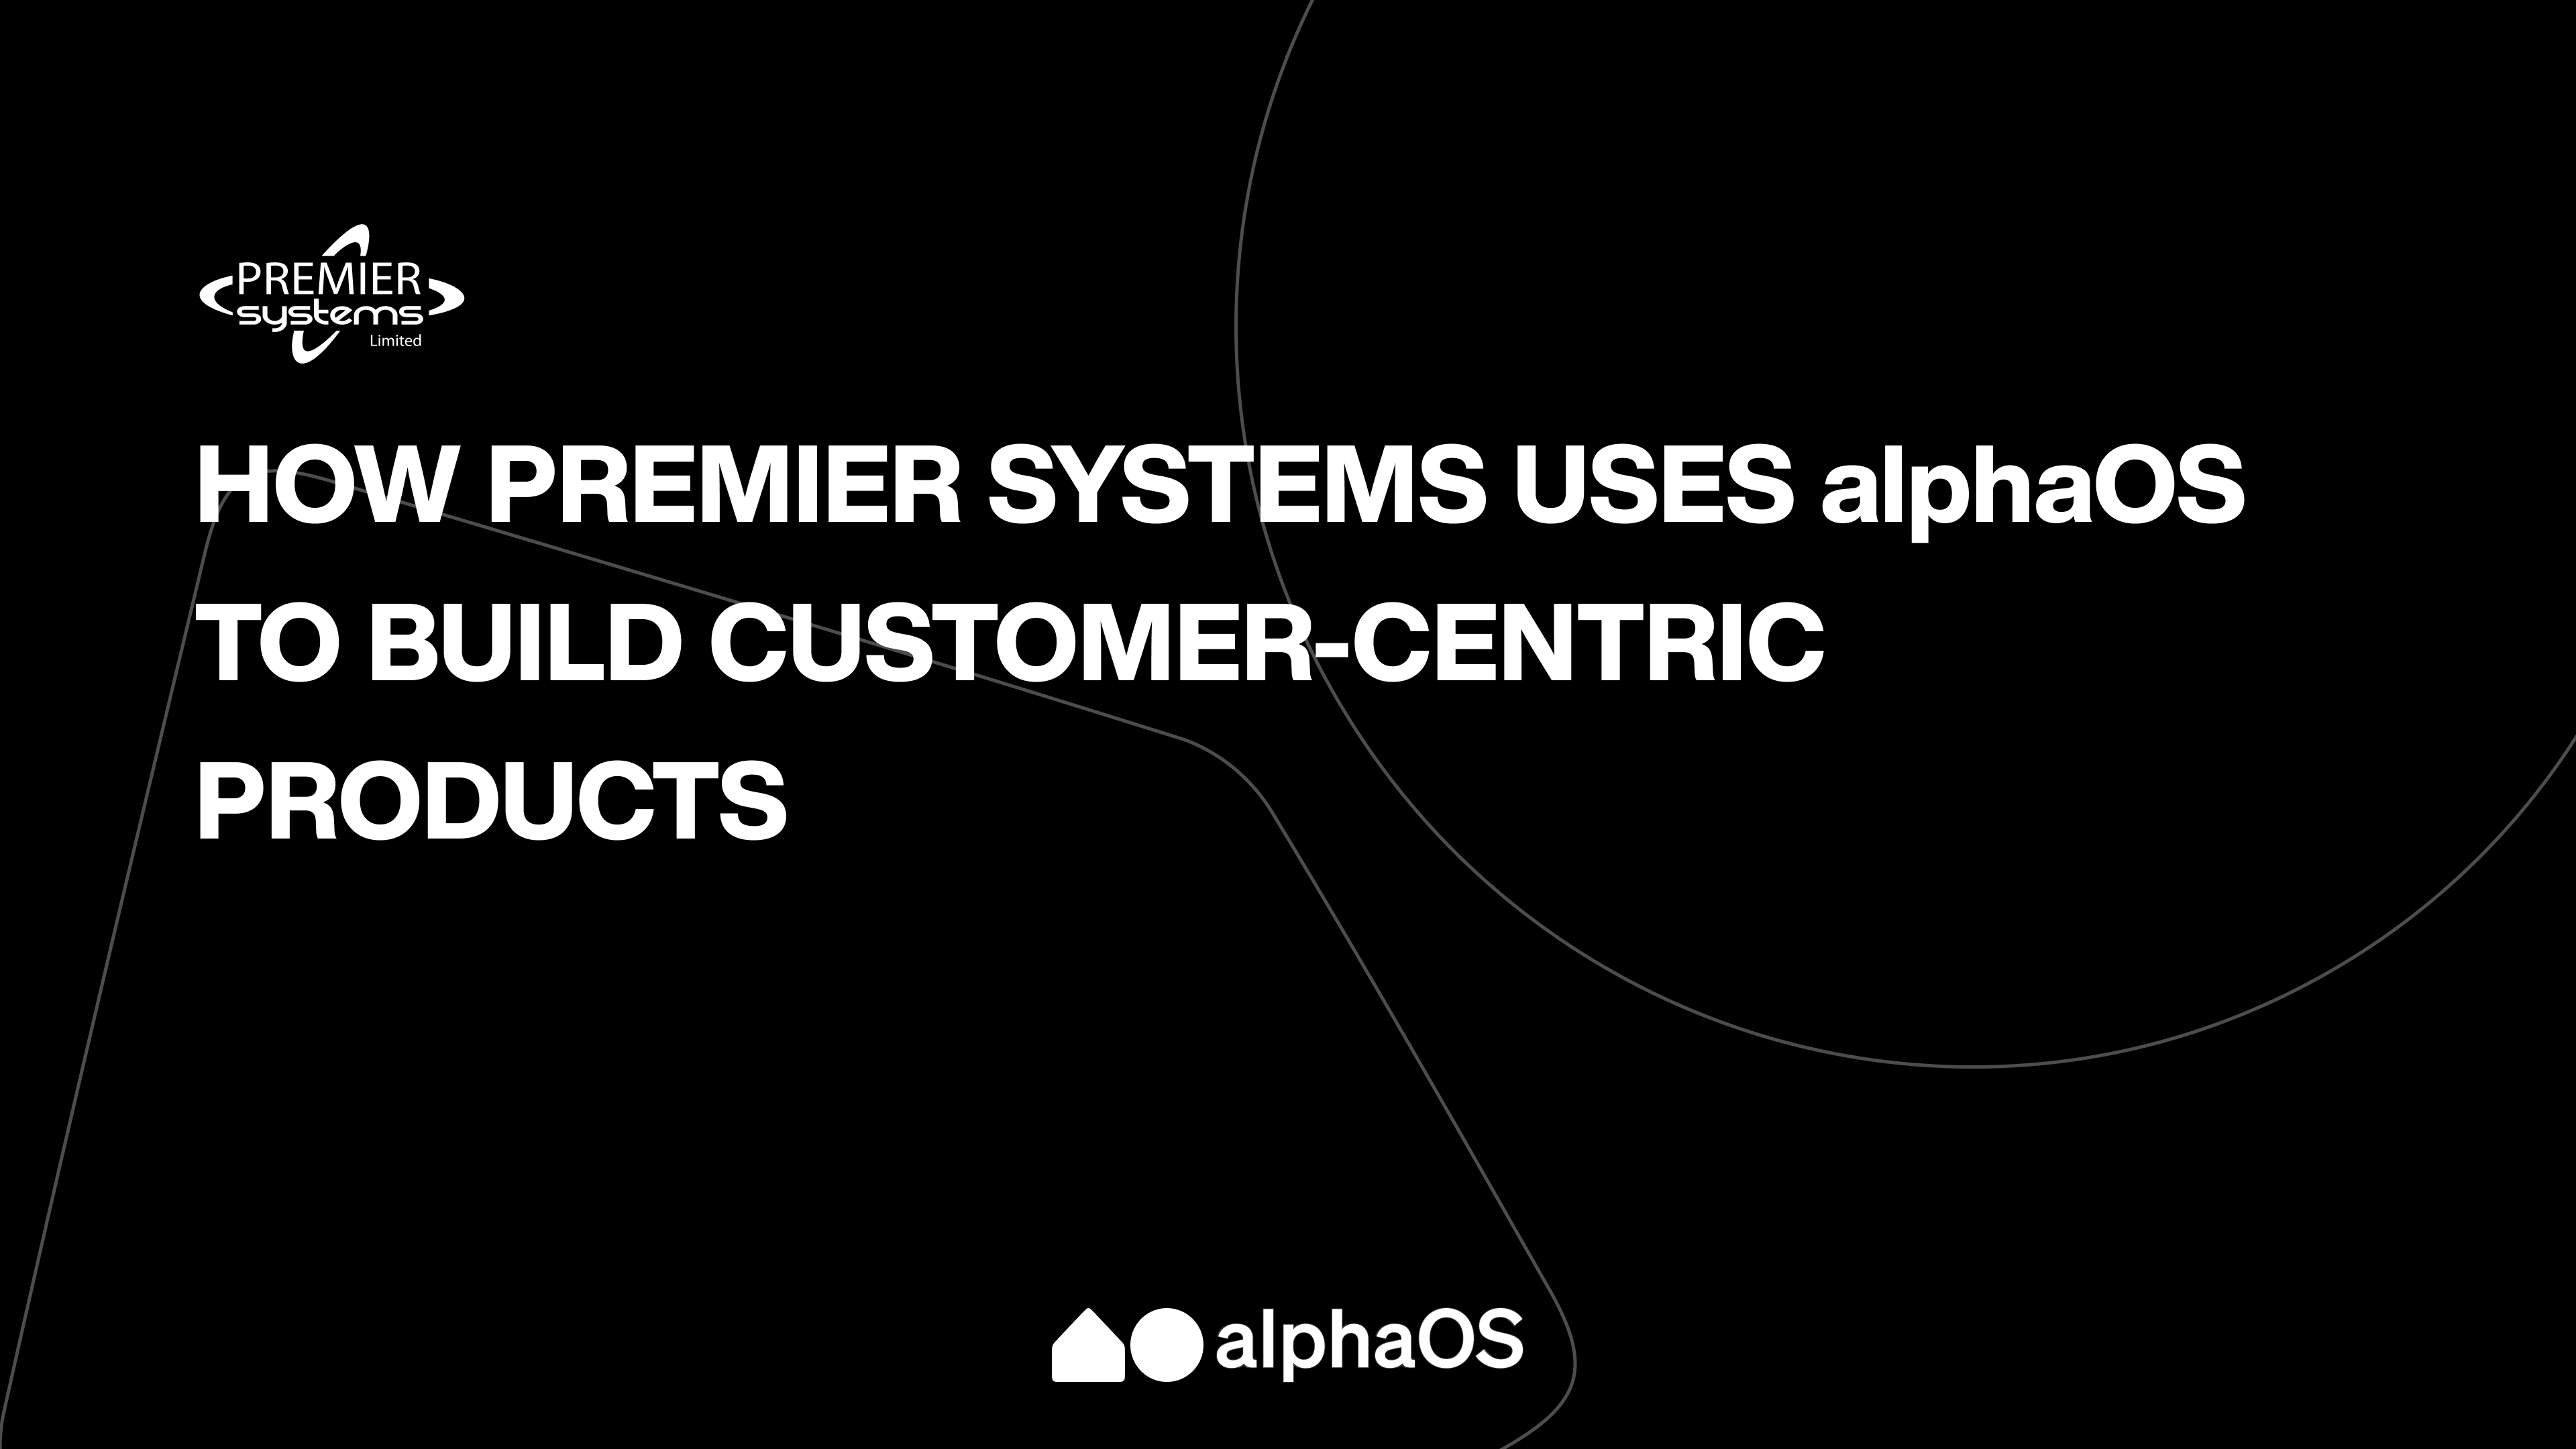 How Premier Systems uses alphaOS to build customer-centric products